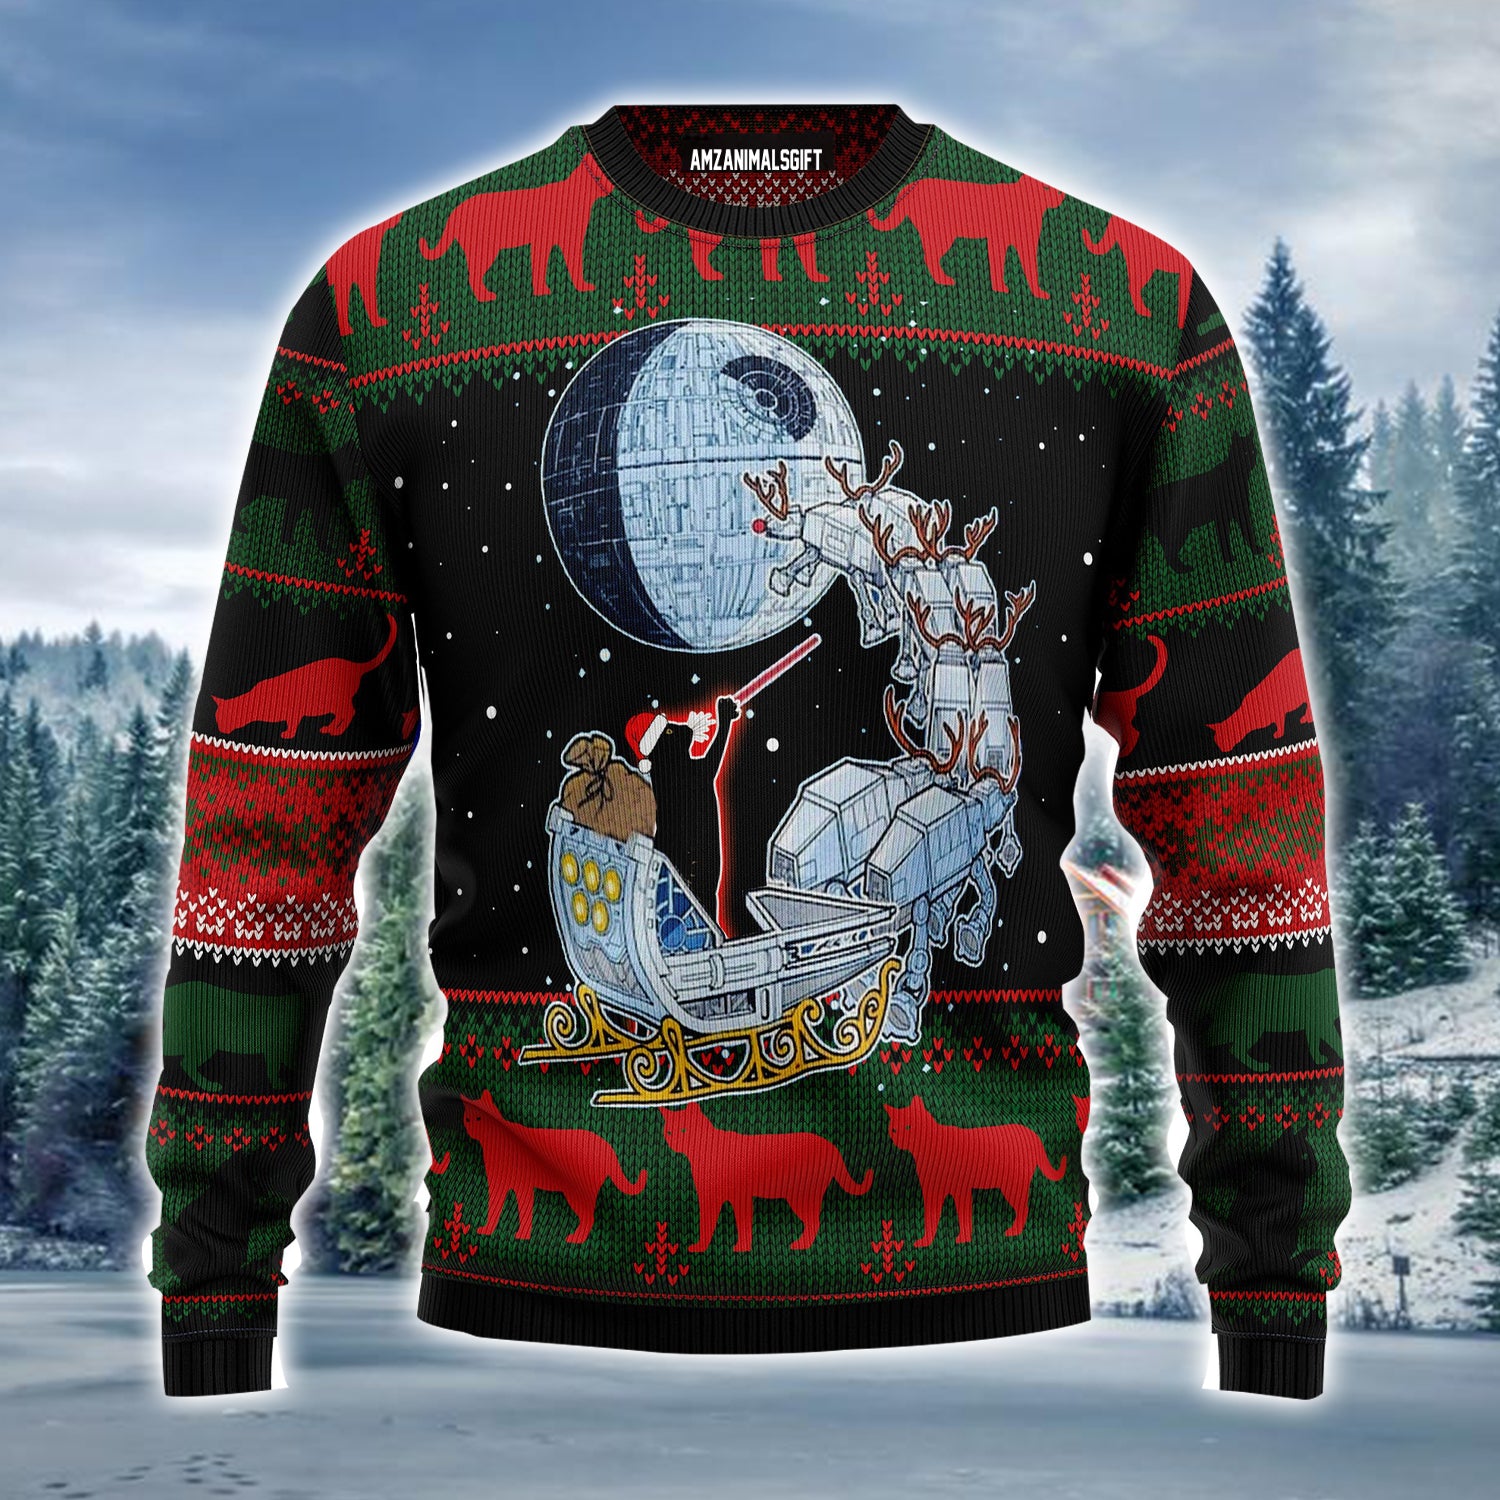 Black Cat Sleigh To Death Star Ugly Christmas Sweater, Christmas Pattern Ugly Sweater For Men & Women - Best Gift For Christmas, Black Cat Lovers